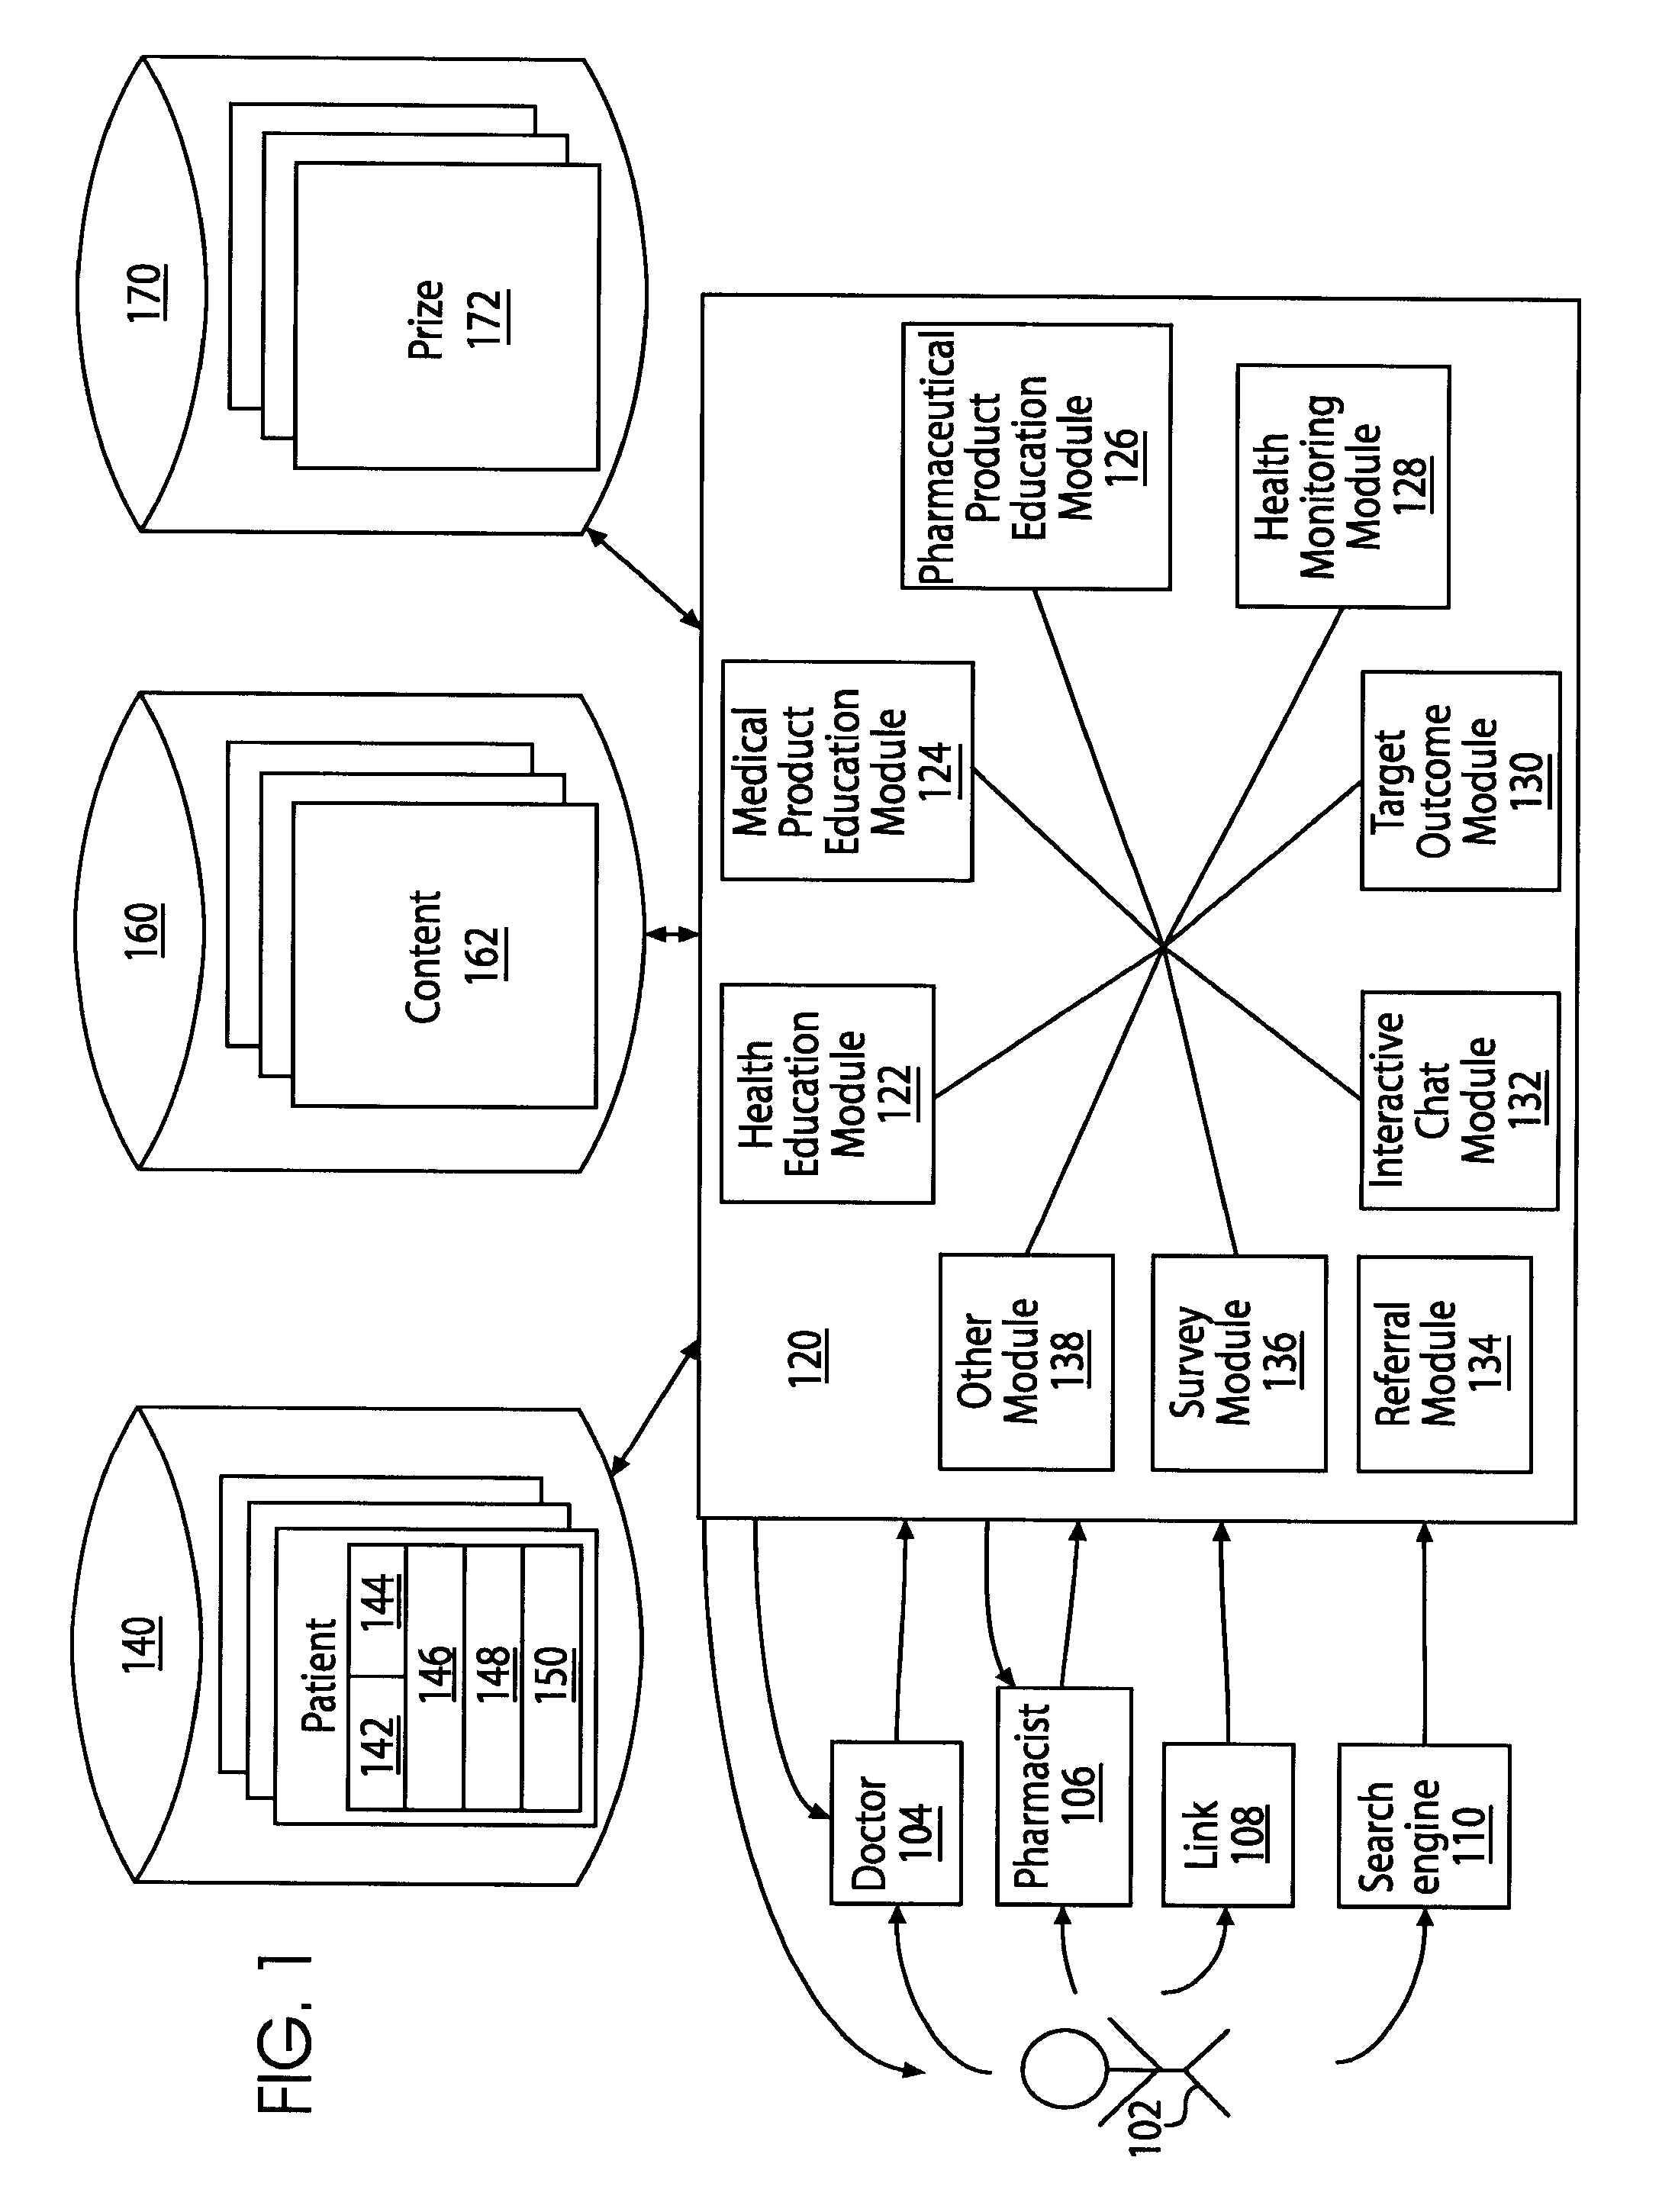 System and Method for Utilizing Incentives to Promote Patient Compliance and Improve Patient Outcome